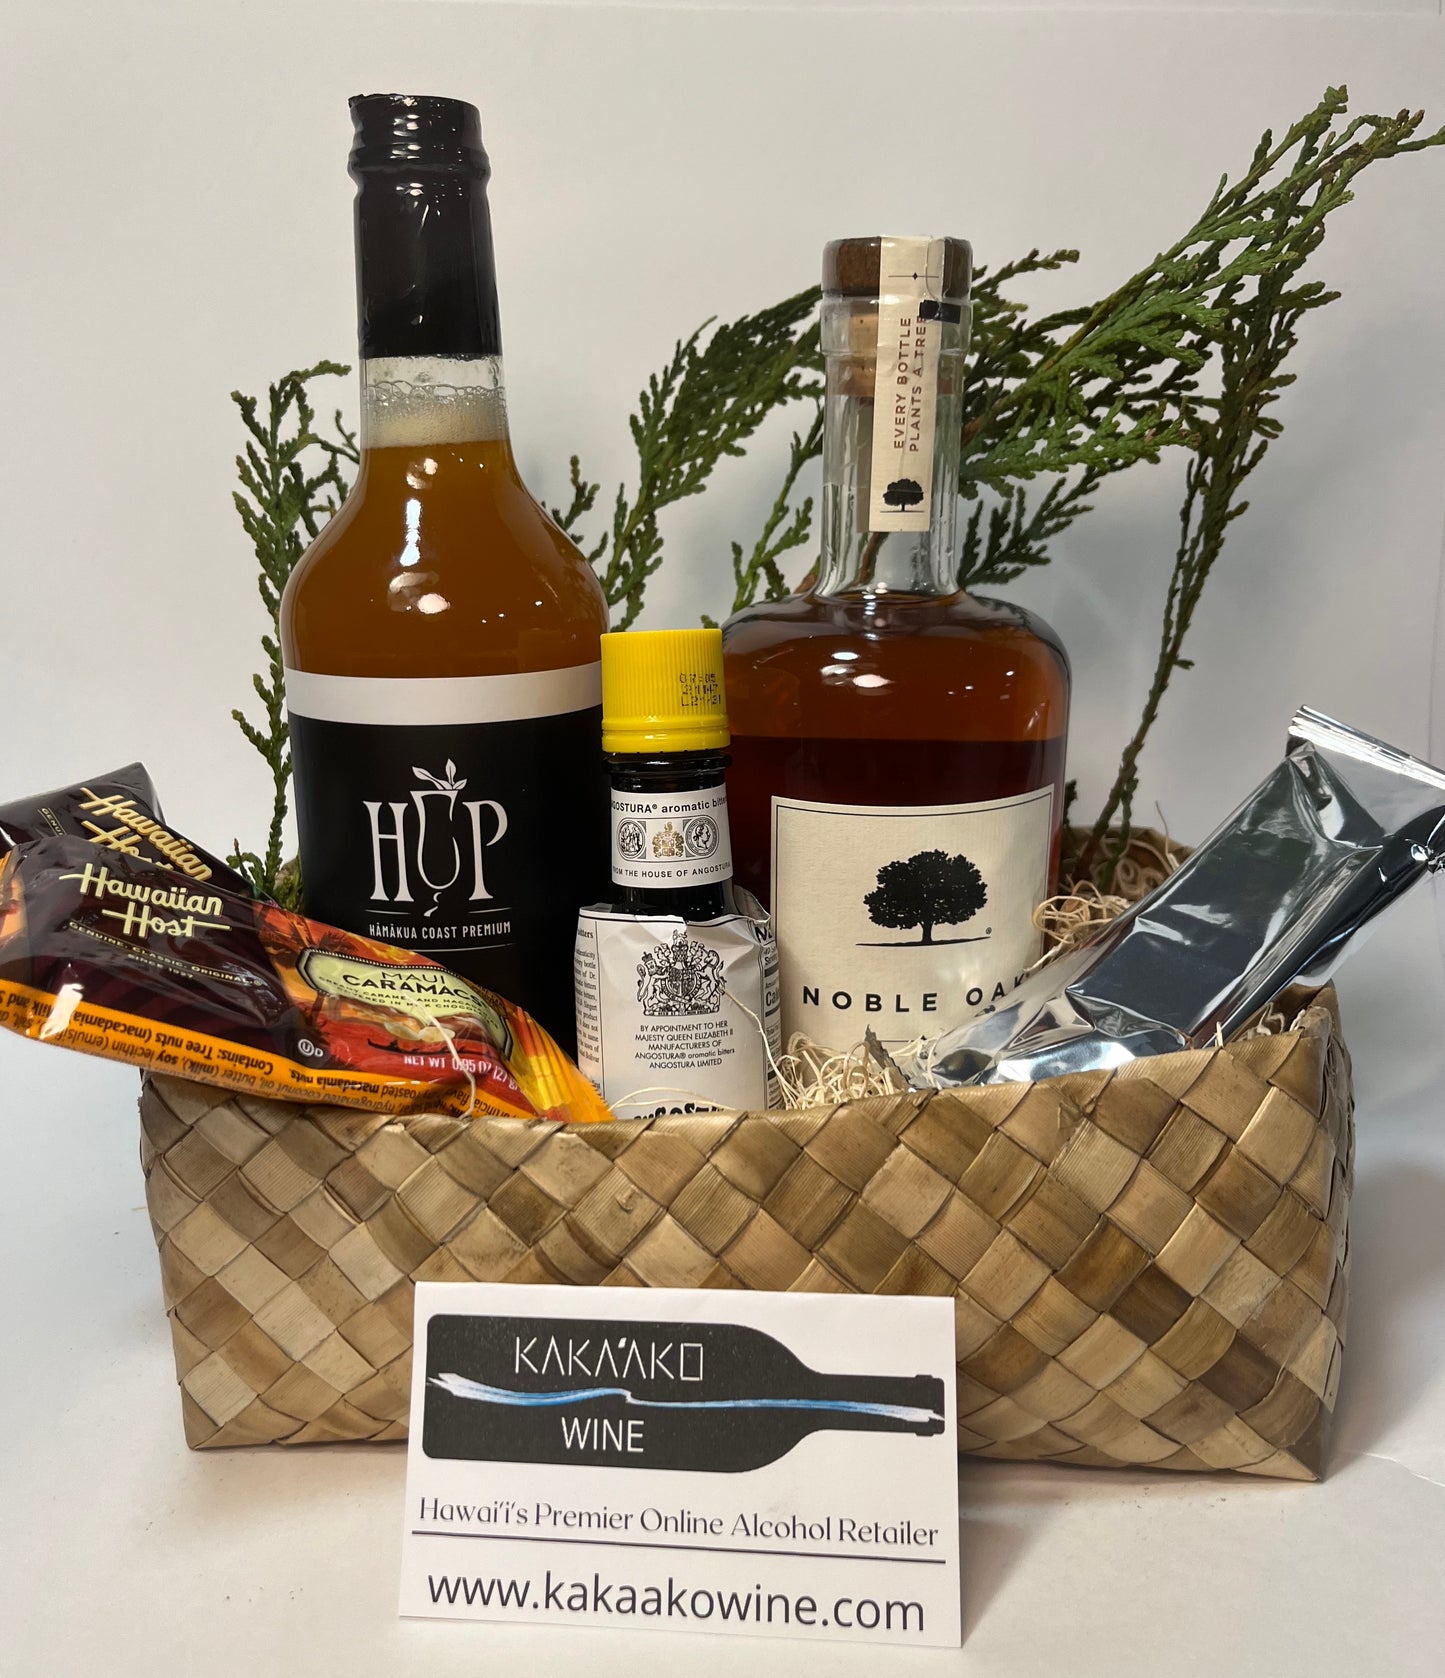 "Island" Old Fashioned Cocktail Gift Basket